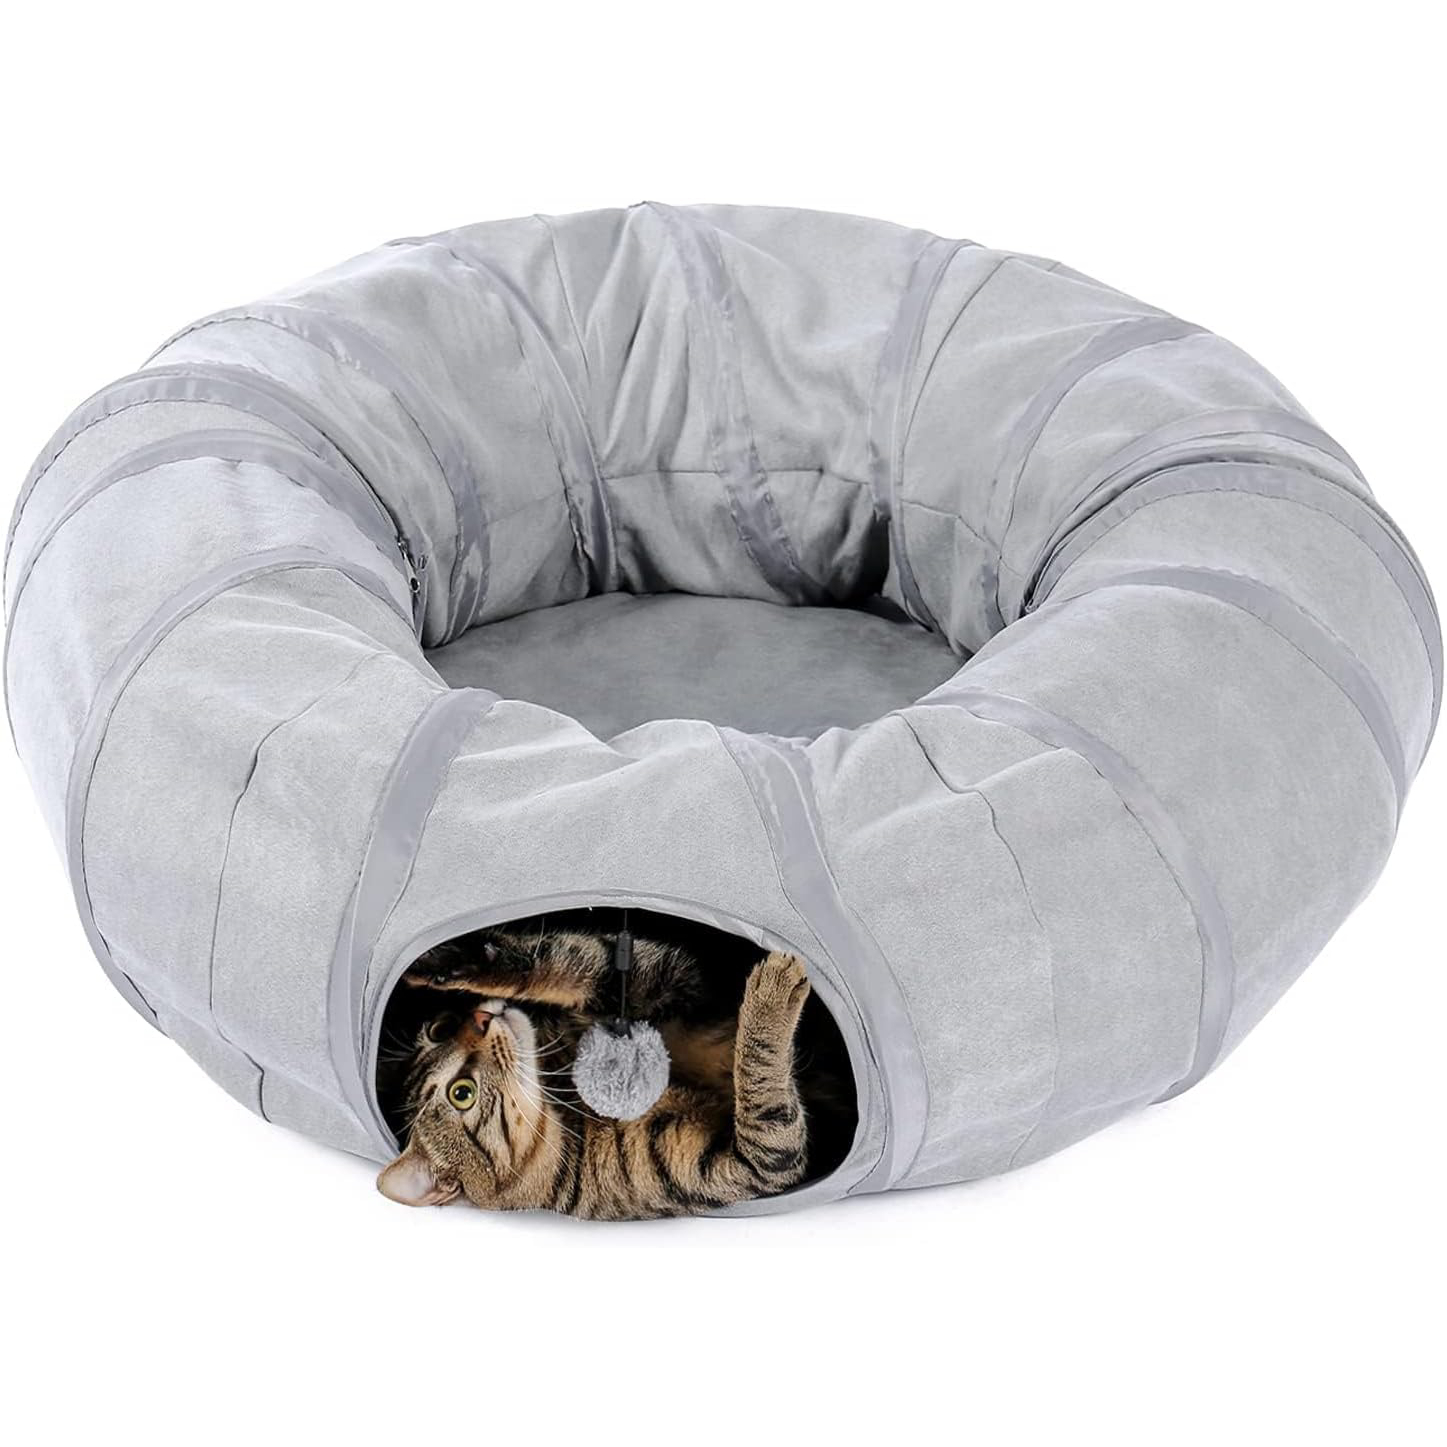 PAWZ Road Cat Tunnel Bed with Central Mat